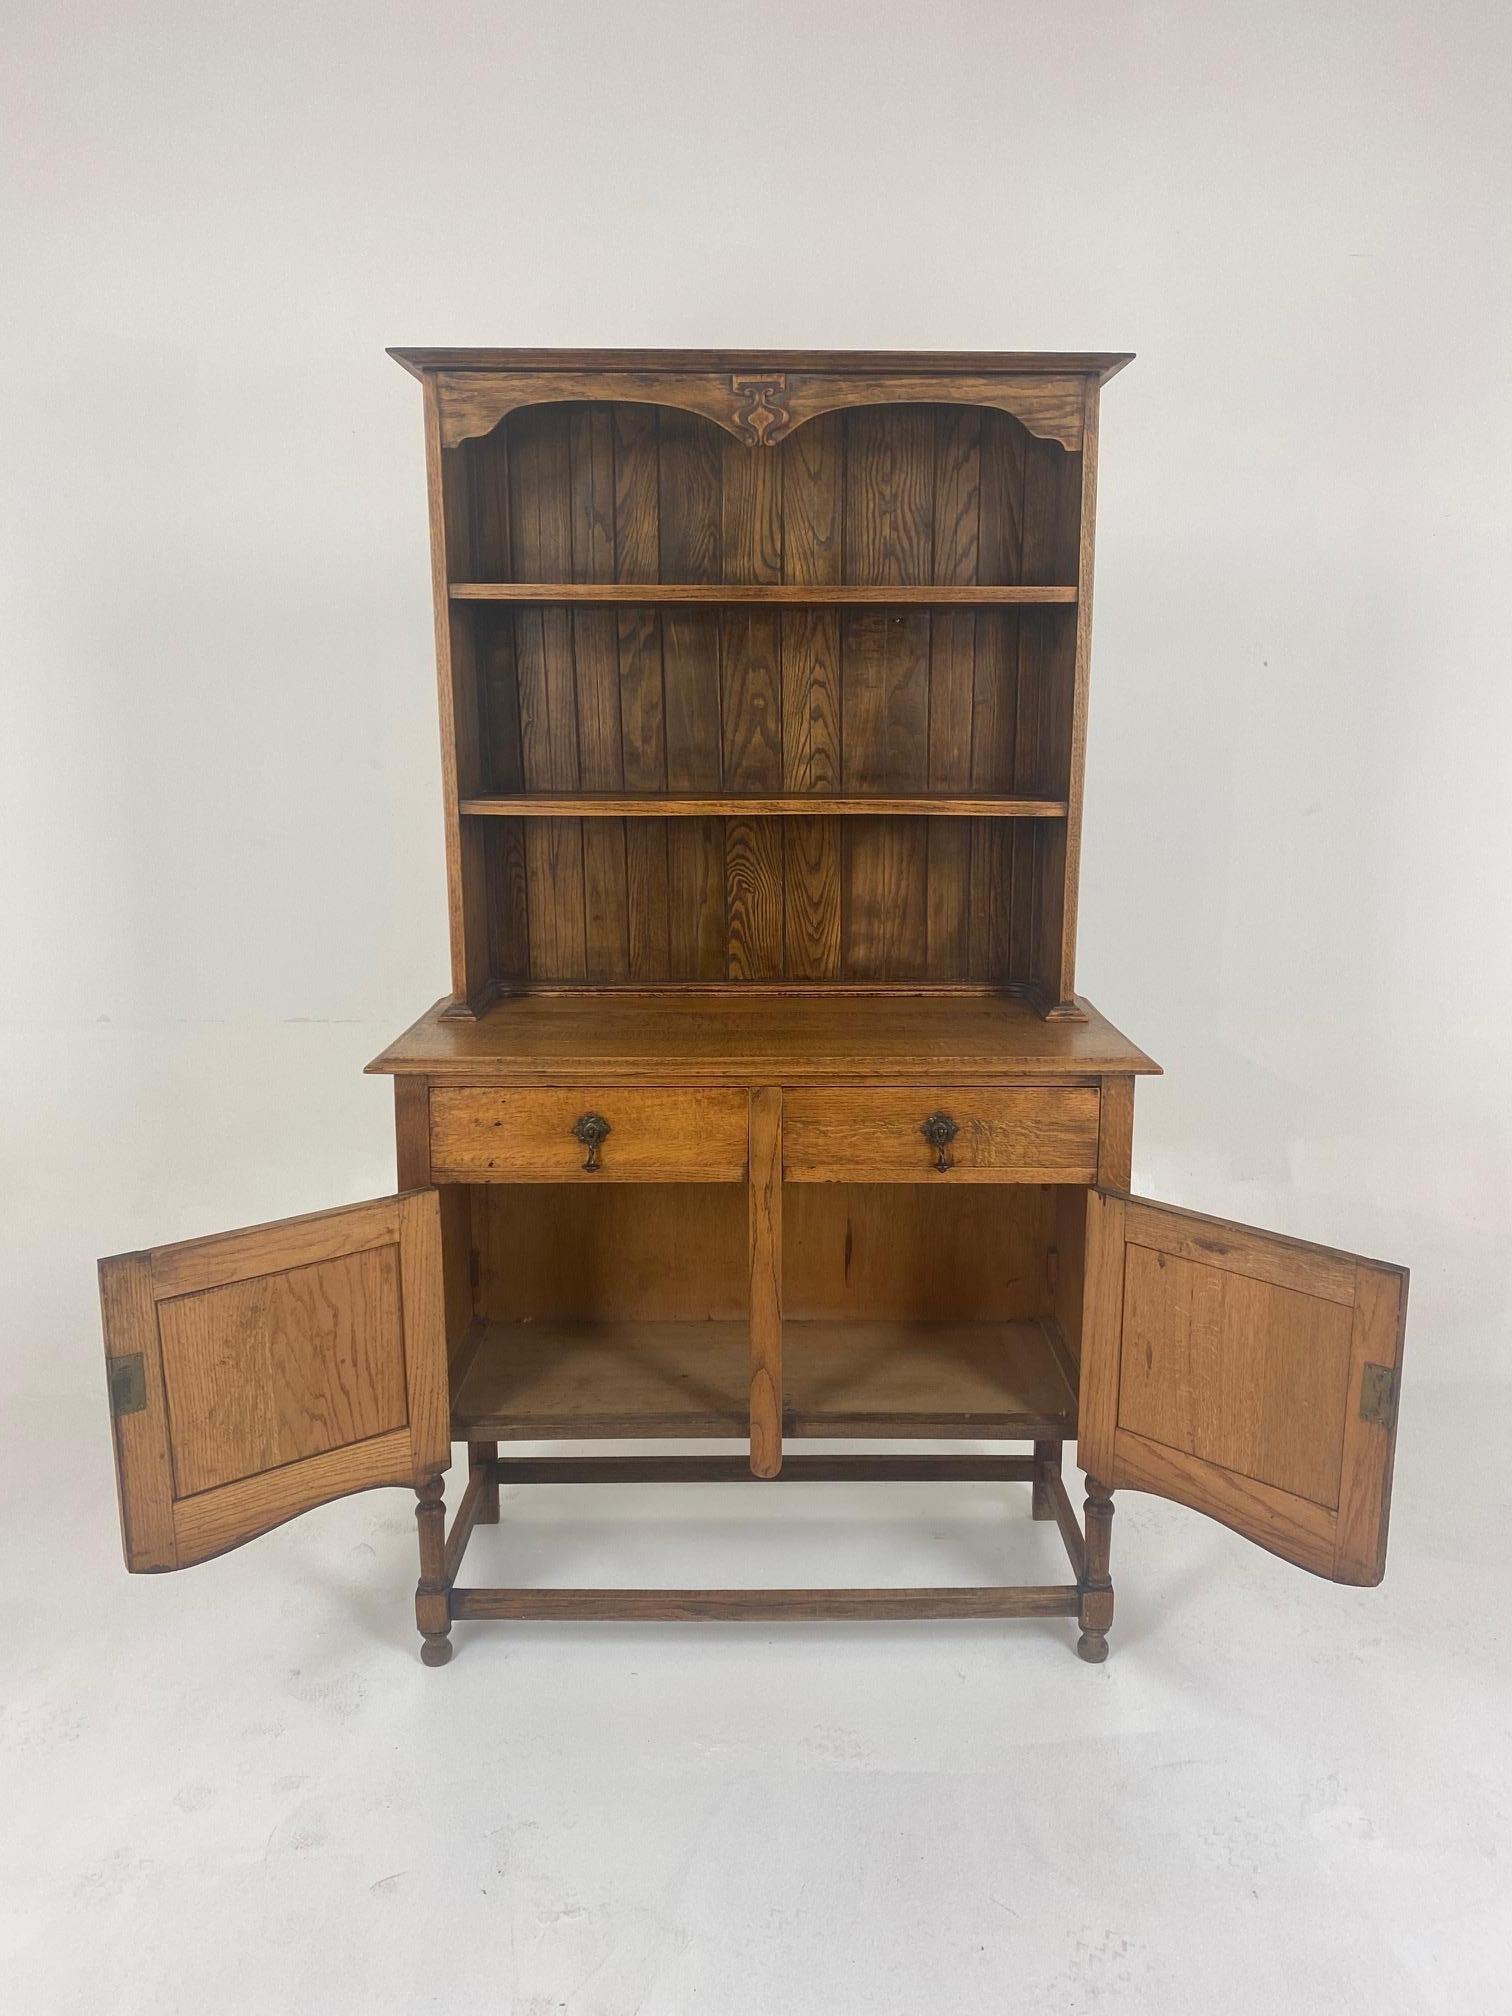 Vintage oak, Welsh dresser, sideboard, buffet and Hutch, Scotland 1930, B650

Scotland 1930
Solid Oak
Original Finish
The plate neck situated above, with carved frieze
Two shelves with plate holders
The base with a pair of dovetailed